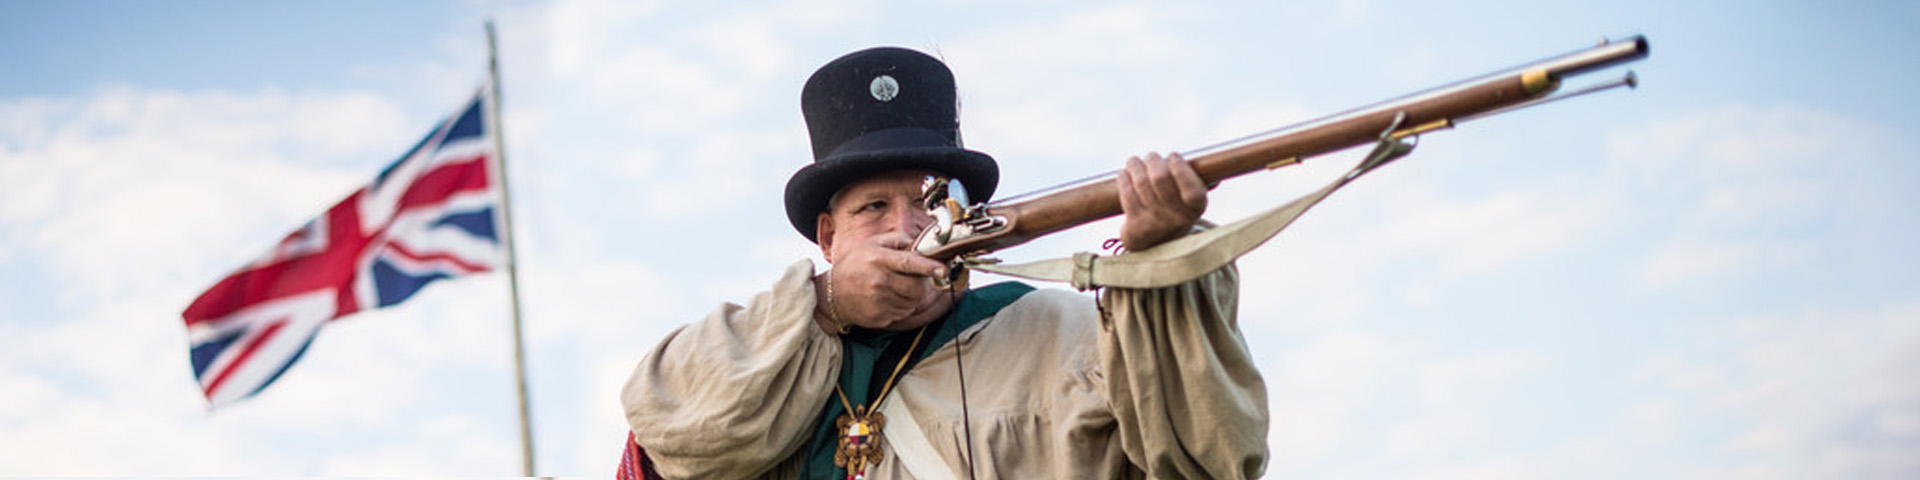 A staff member in costume aiming a musket.